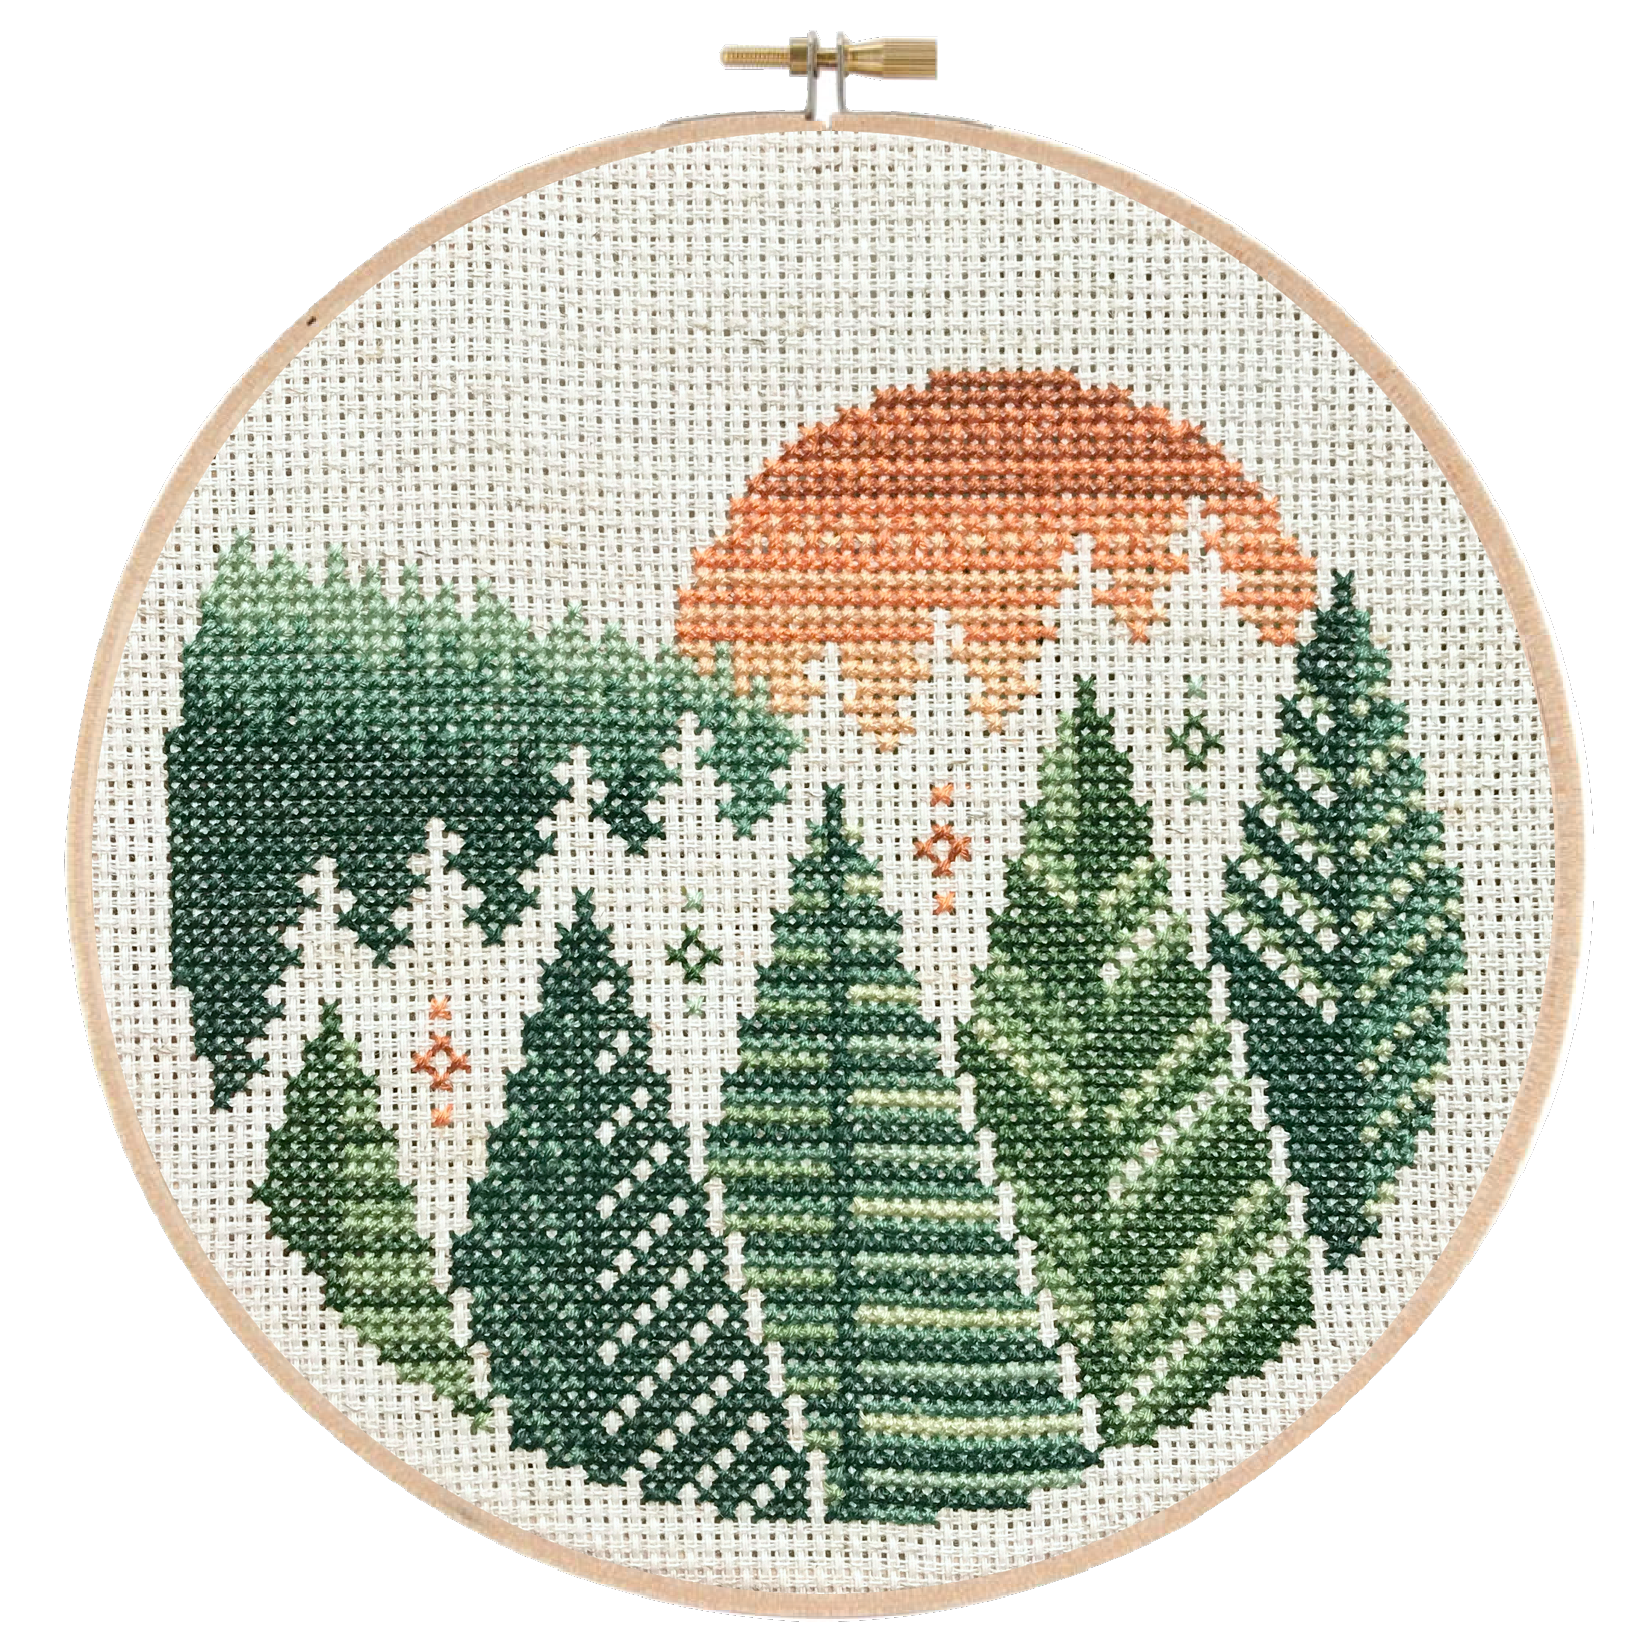 Stamped Cross Stitch Kits for Adults Beginner-Counted Cross Stitch Kit  Abstract Mountain Forest 11CT Pre-Printed Pattern Fabric Embroidery Crafts